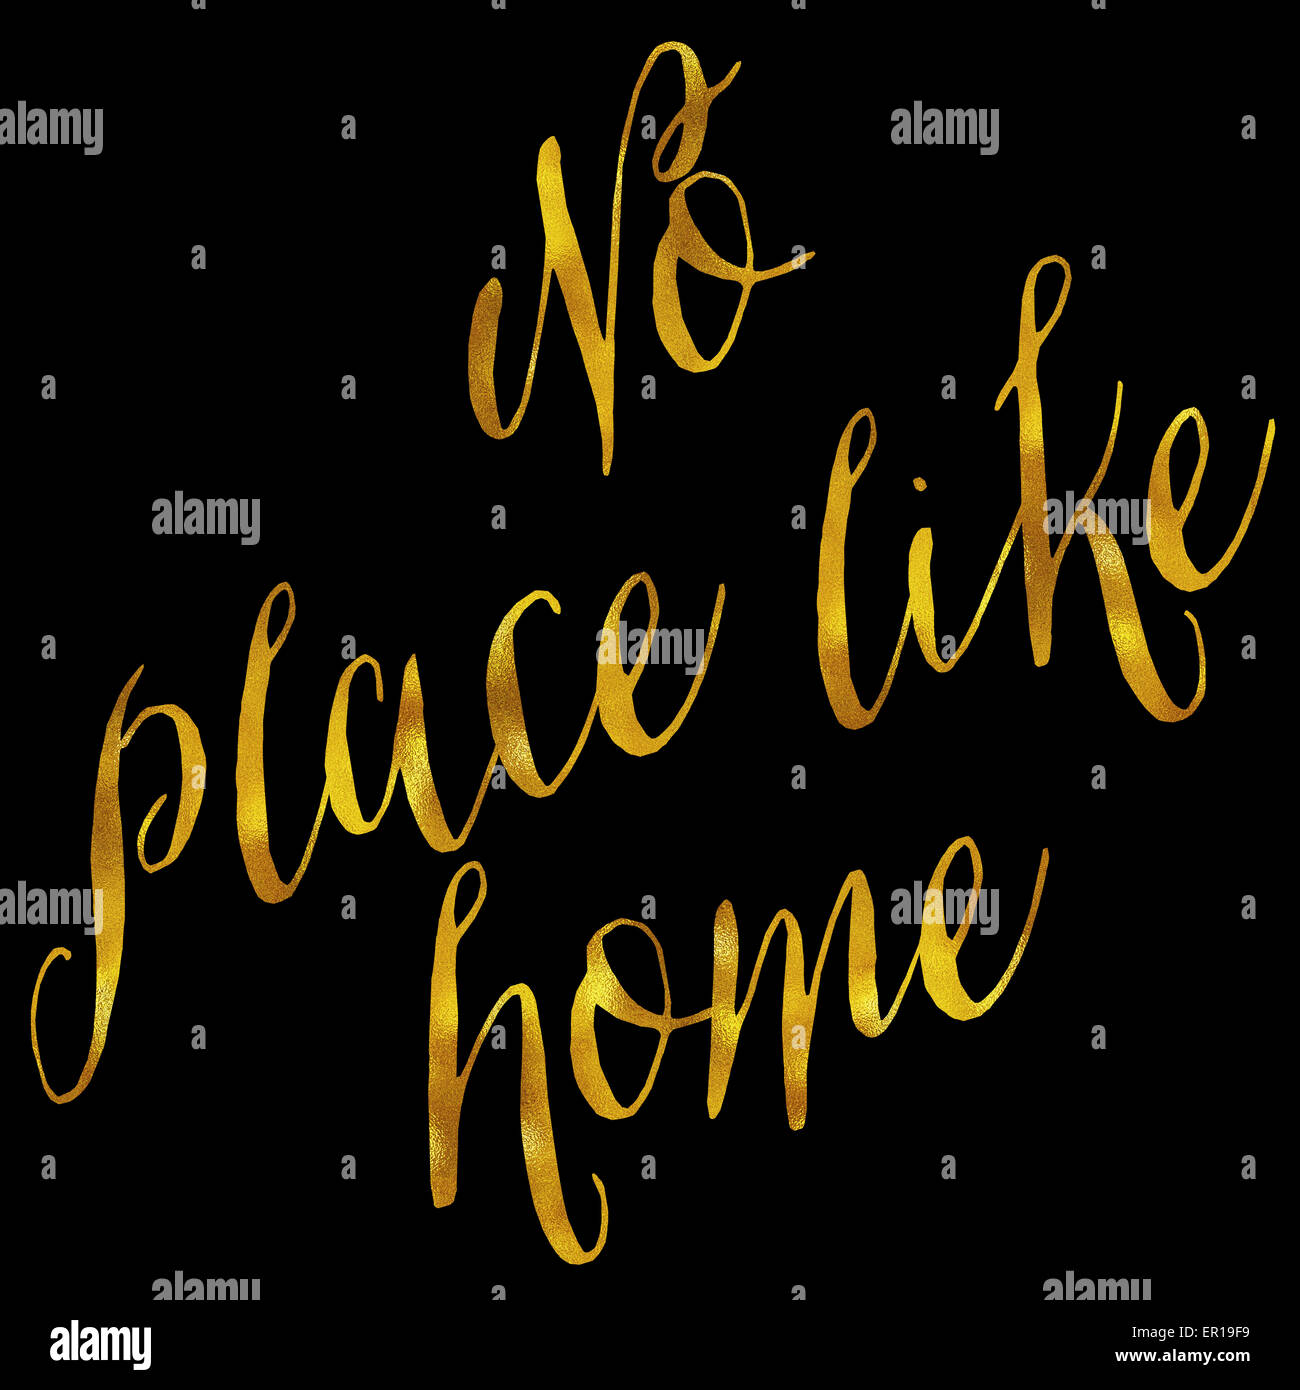 No Place Like Home Gold Faux Foil Metallic Glitter Quote Isolated on Black Stock Photo